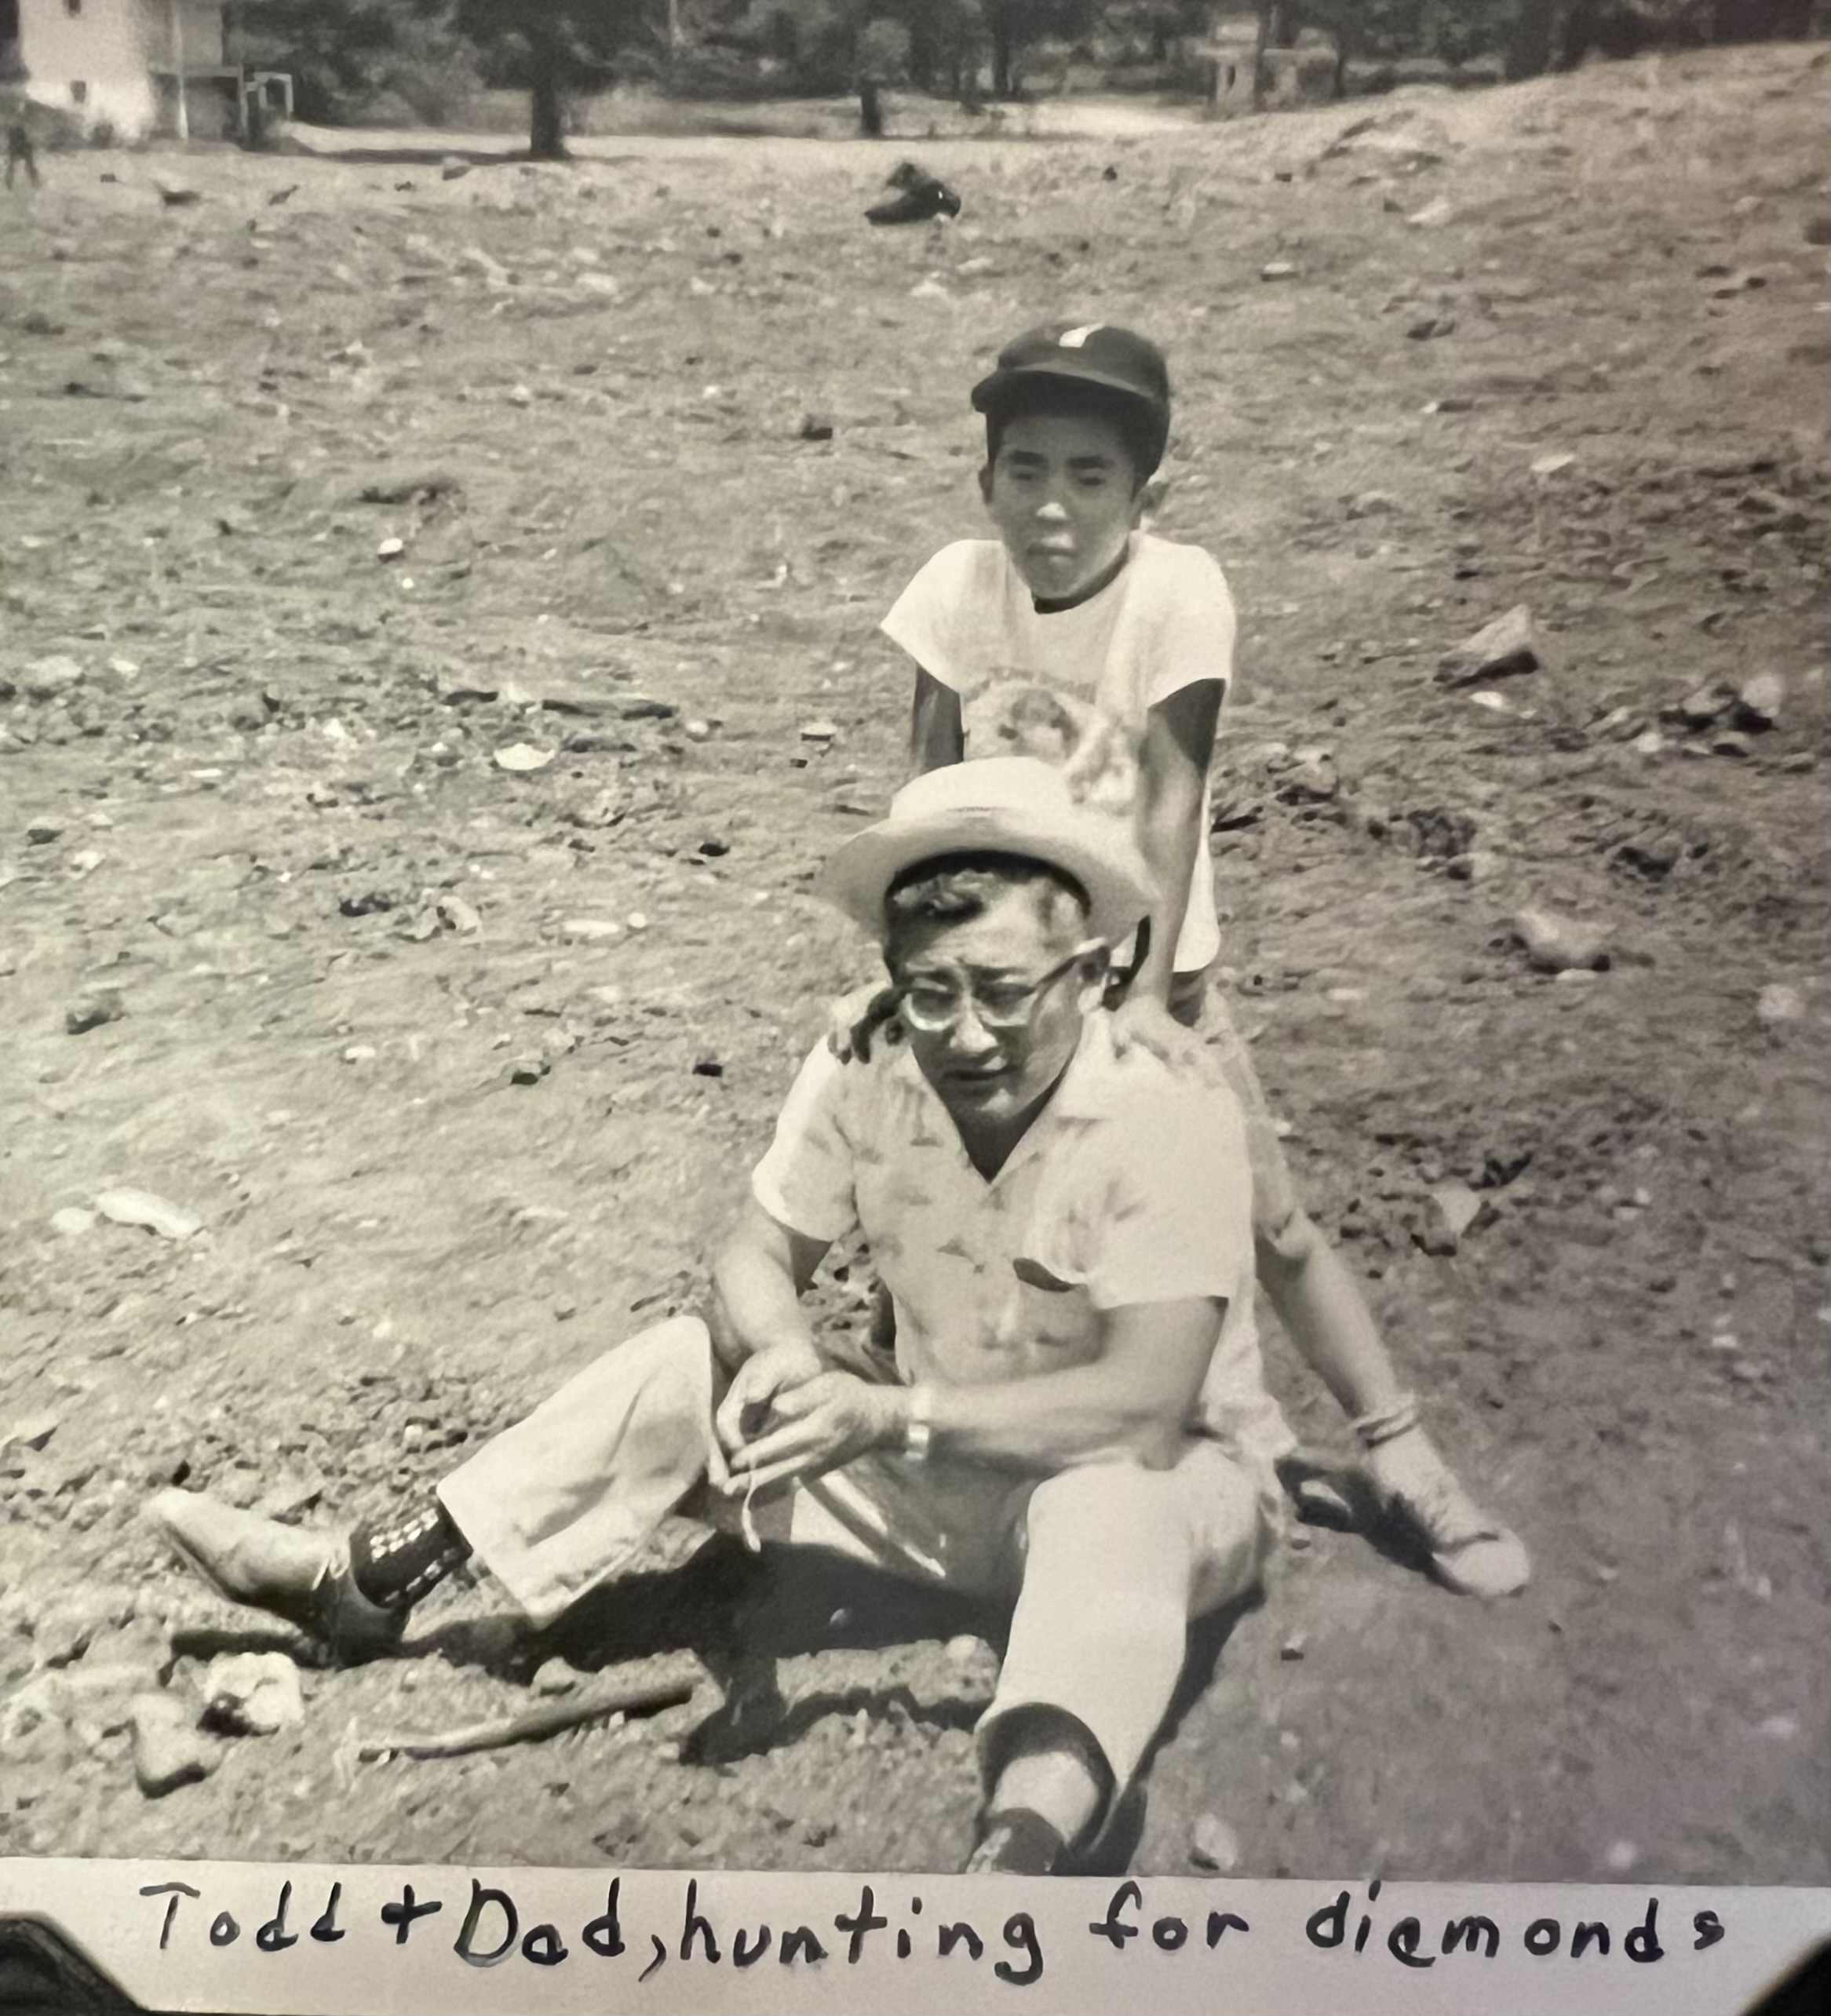 Hiro Hayataka sitting on the dirt ground, his son, Todd, leaning on his shoulders. Text reads ''Todd and Dad, hunting for diamonds'.